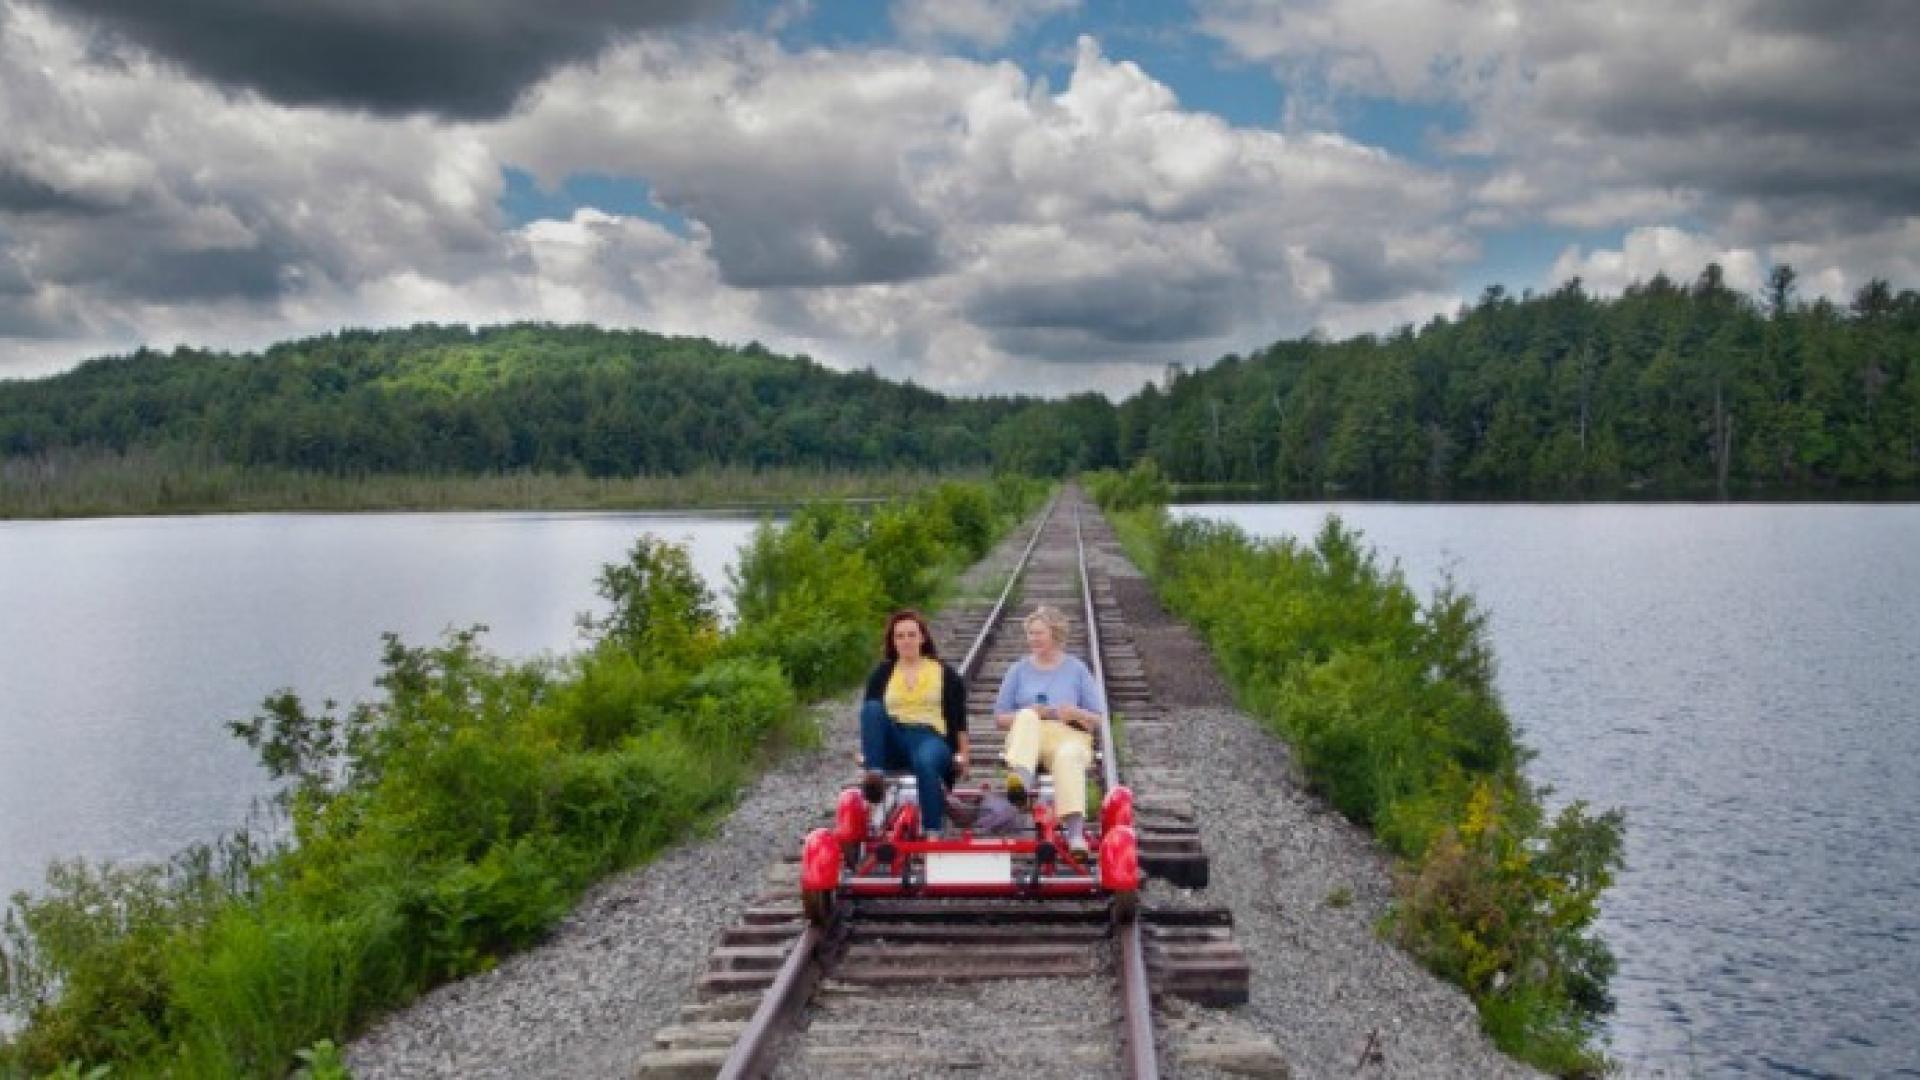 Is Another ADK Rail Trail Possible?